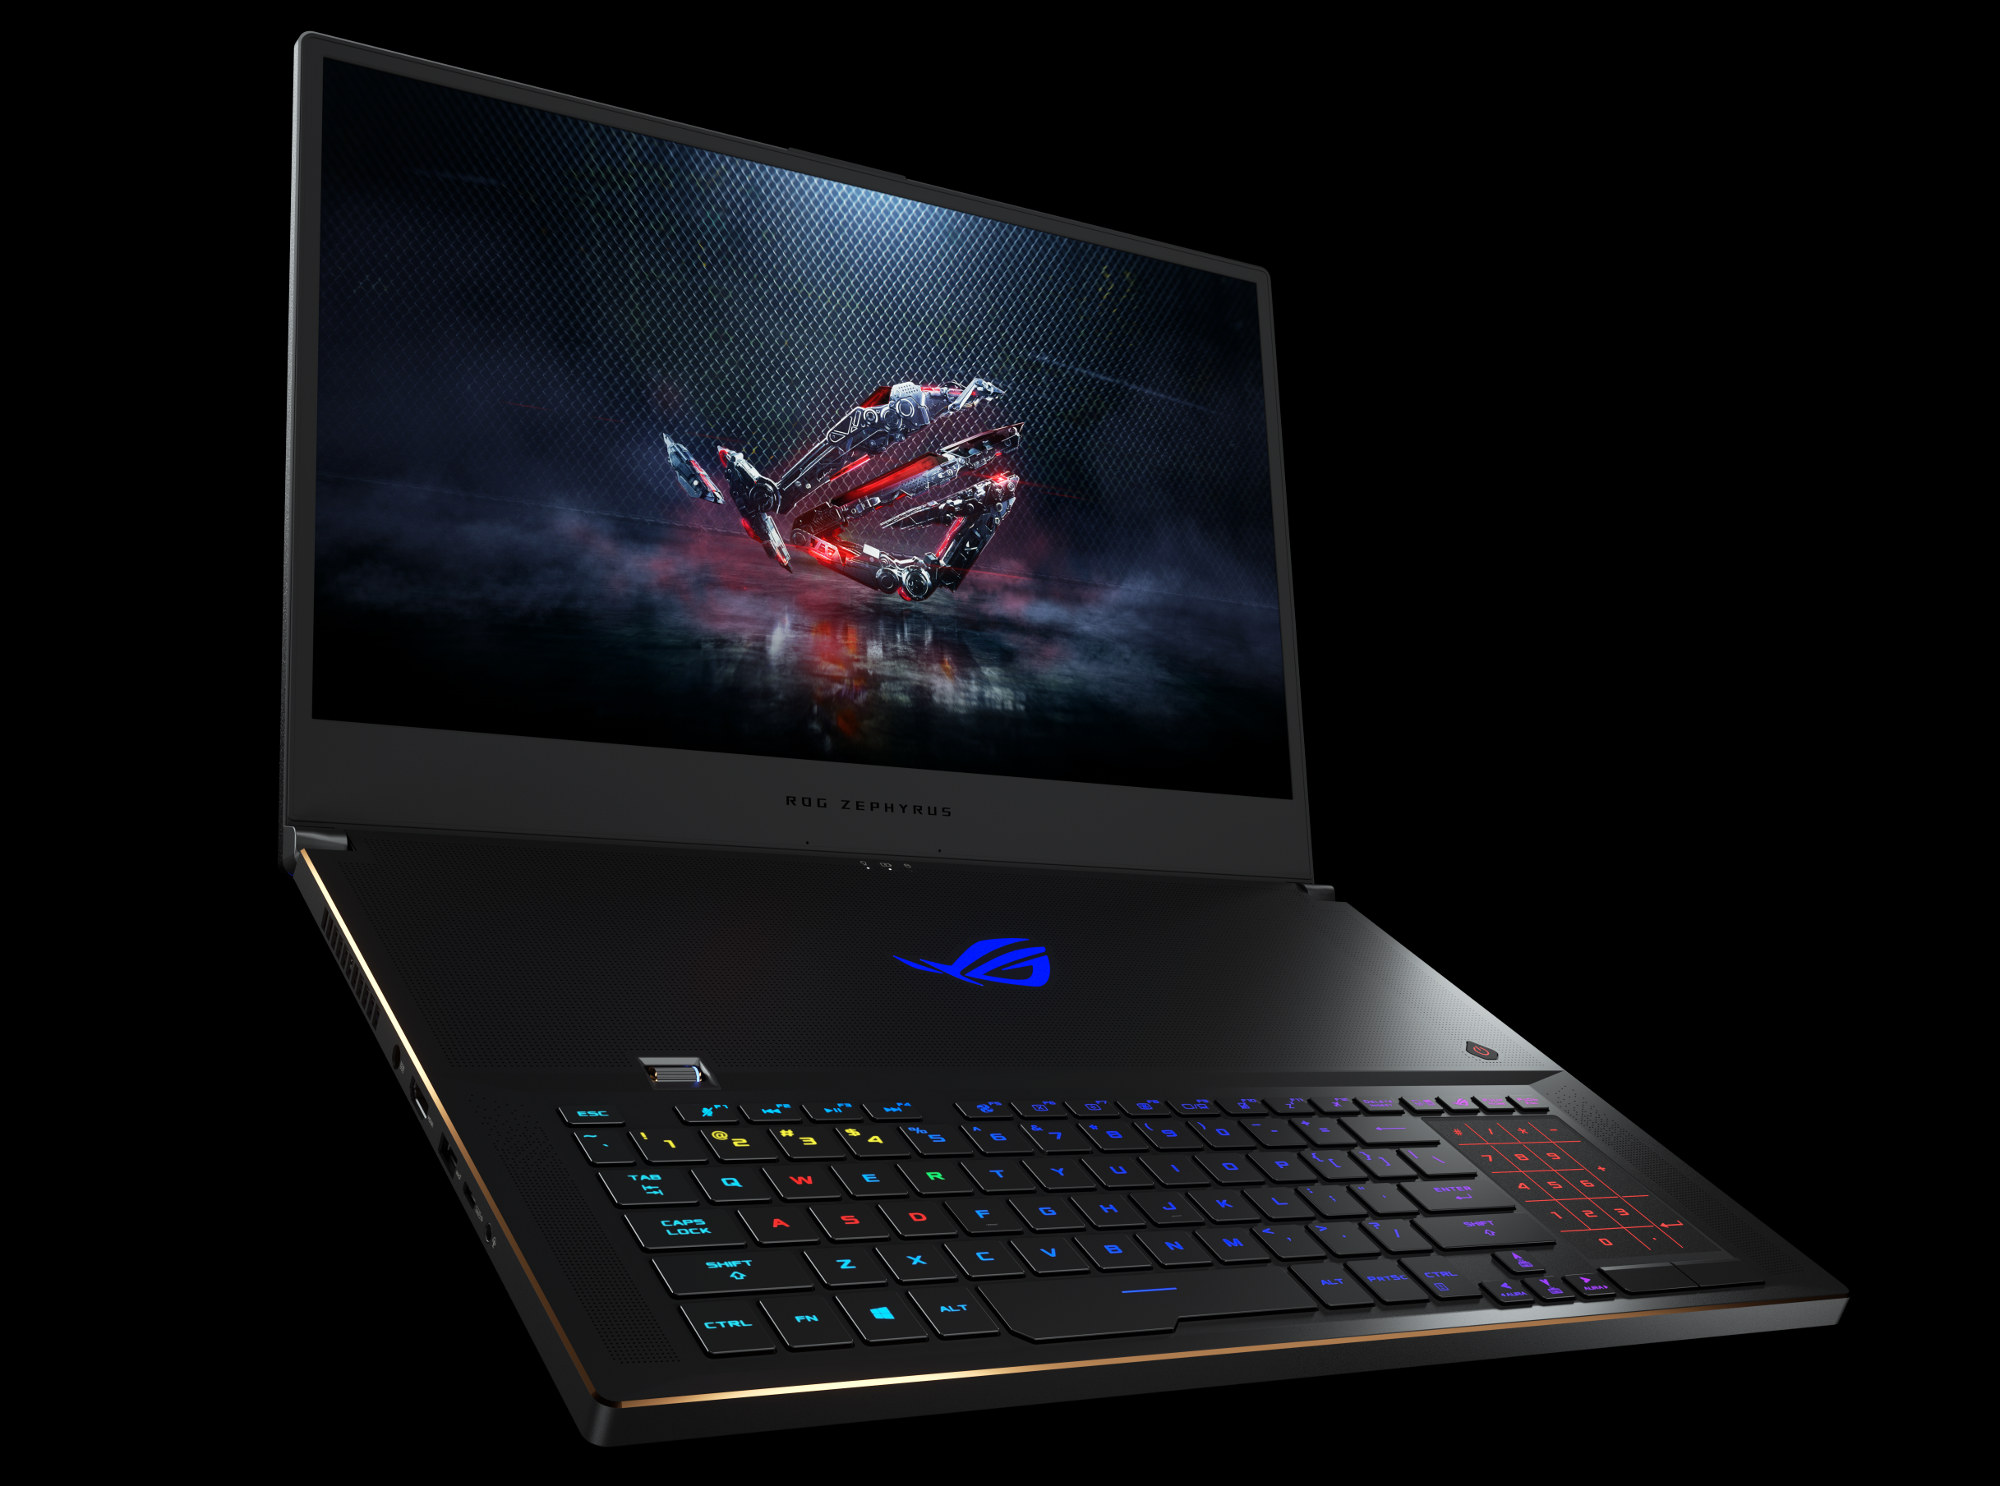 Go big and stay slim with the new ROG Zephyrus S GX701 ultra-slim gaming  laptop | ROG - Republic of Gamers Global